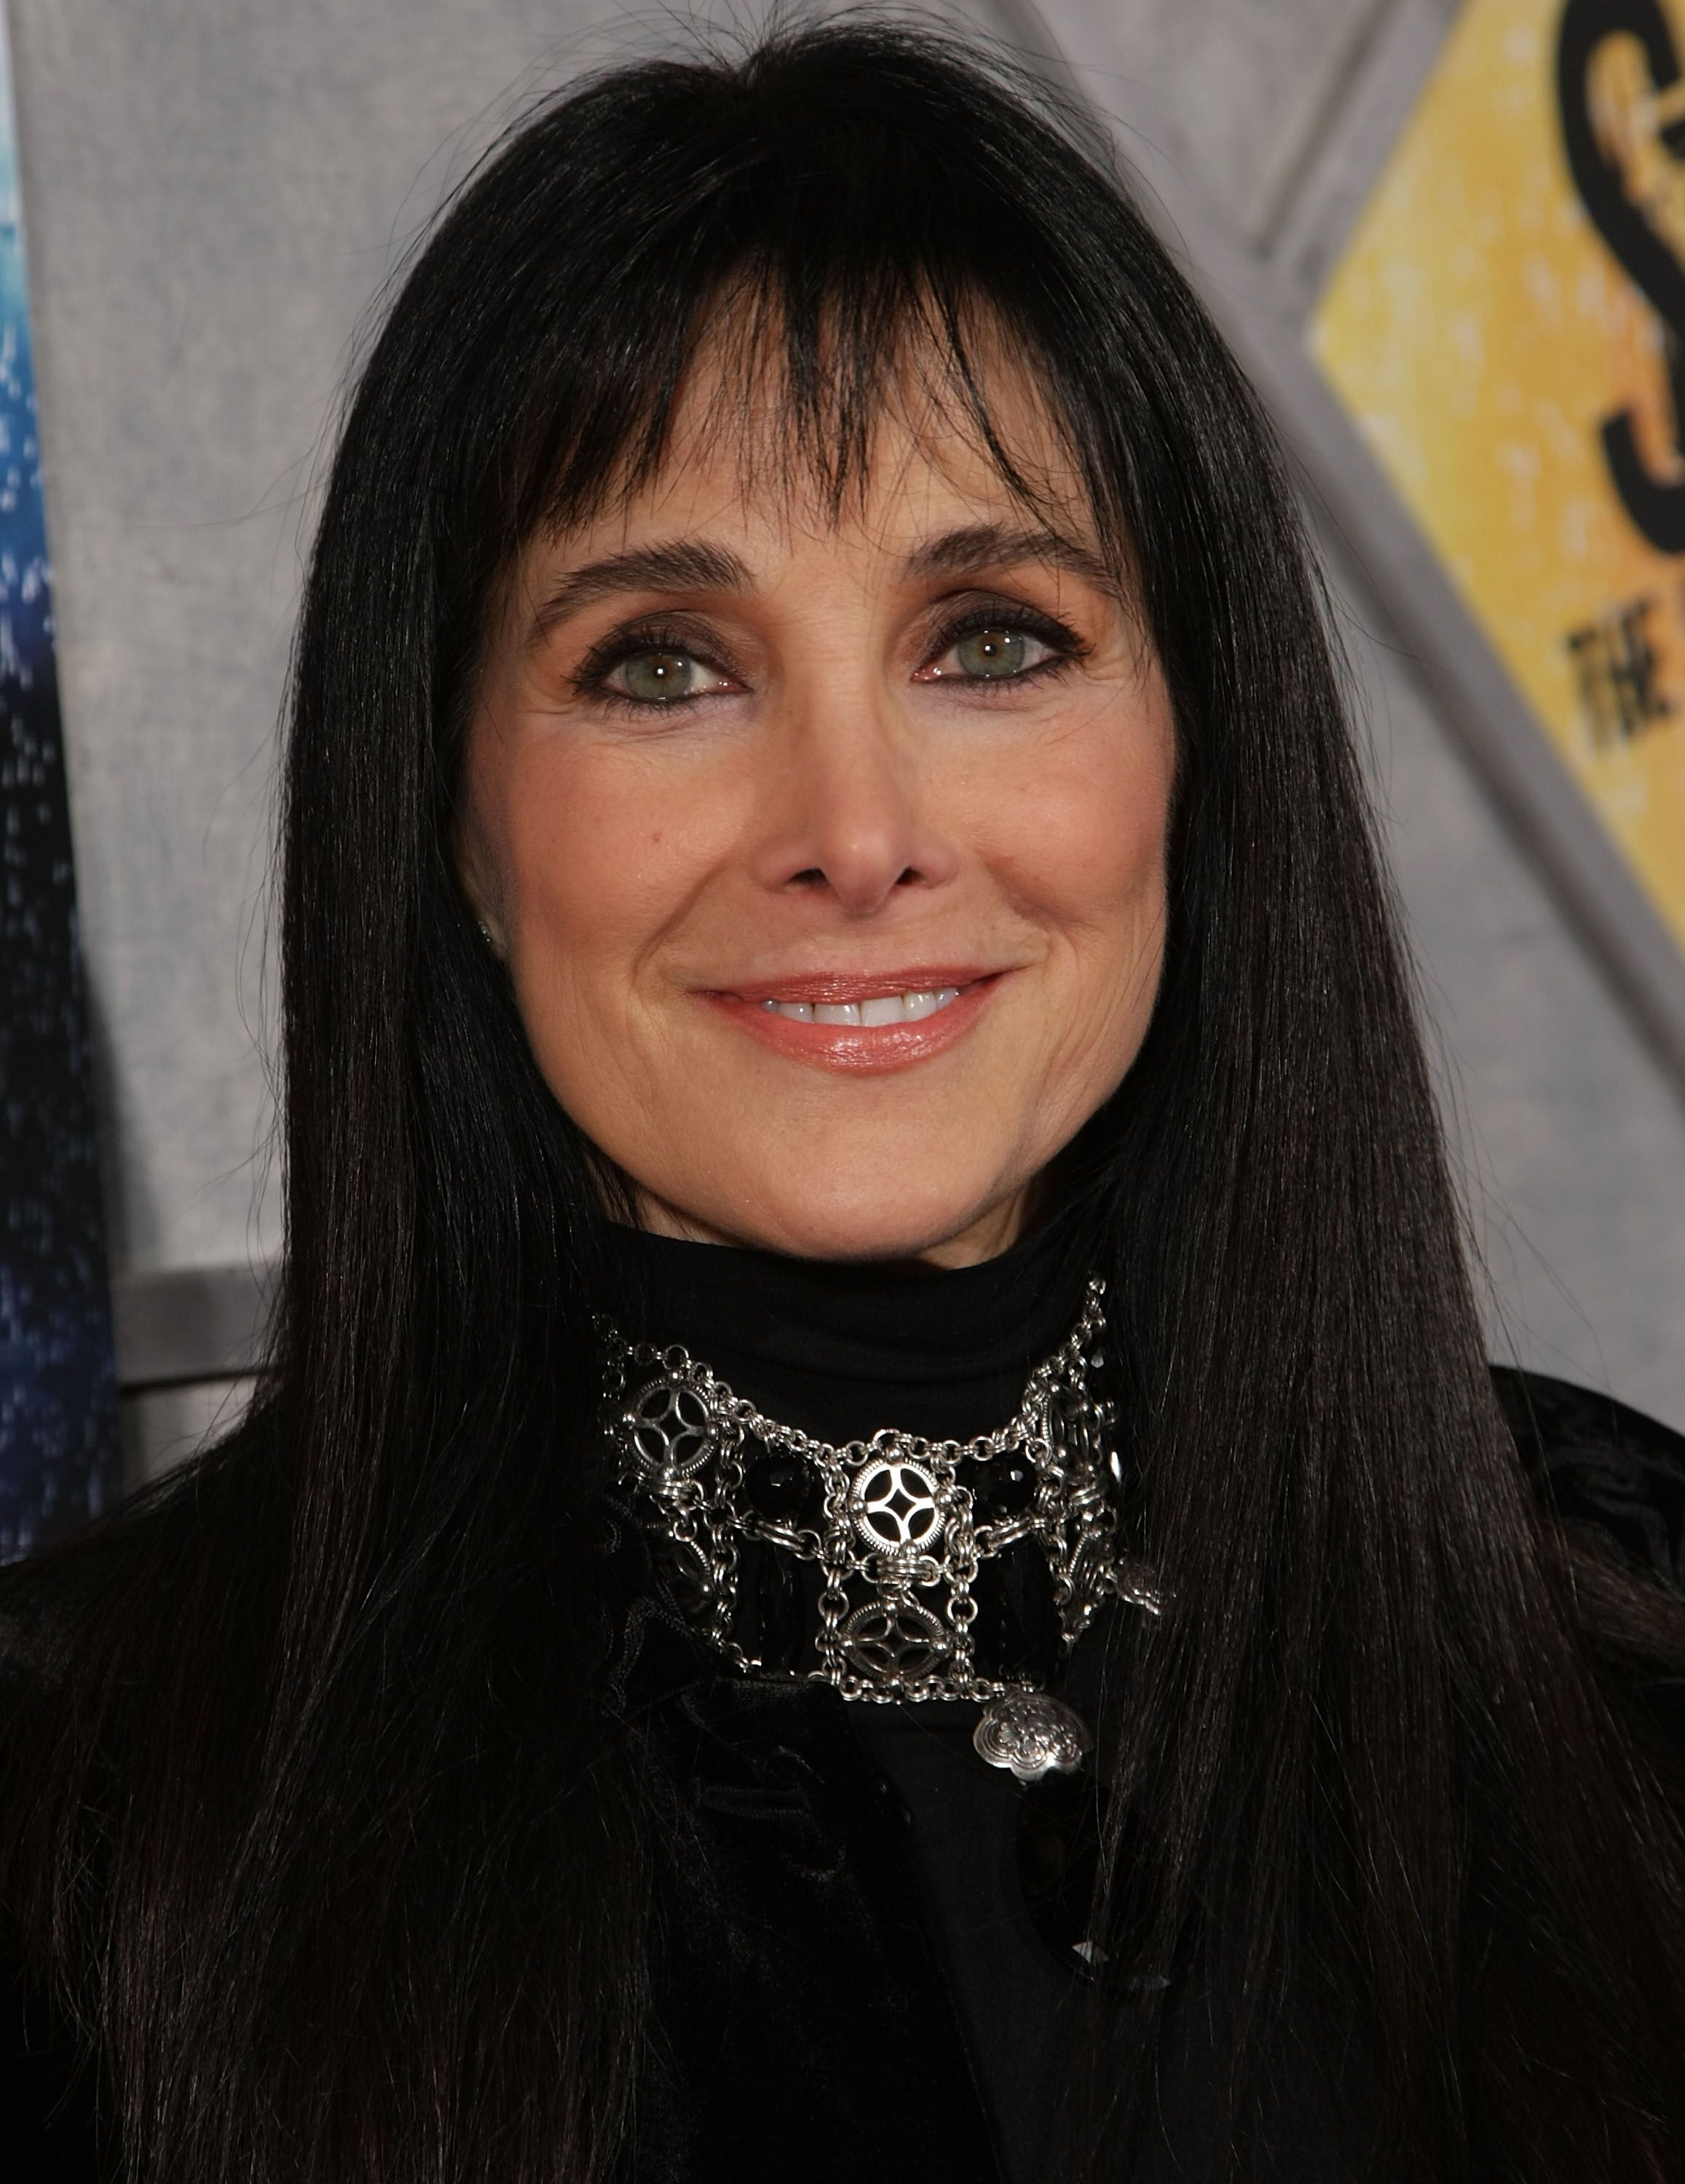 Connie Sellecca at the premiere of the film "Step Up 2 The Streets" in 2009 | Source: Wikimedia